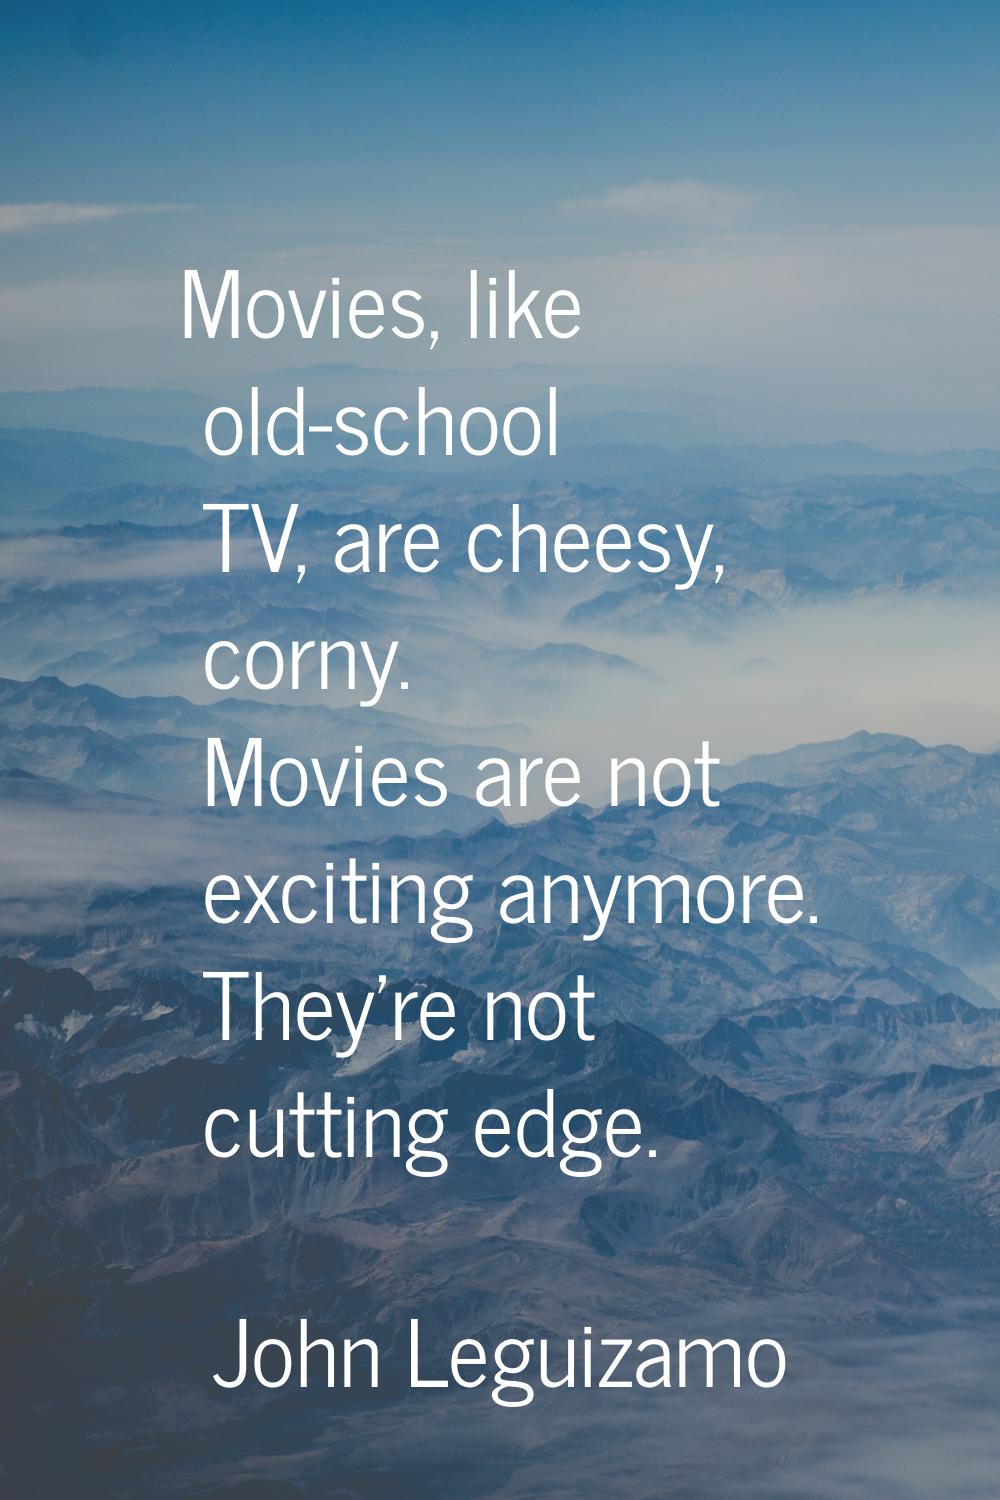 Movies, like old-school TV, are cheesy, corny. Movies are not exciting anymore. They're not cutting